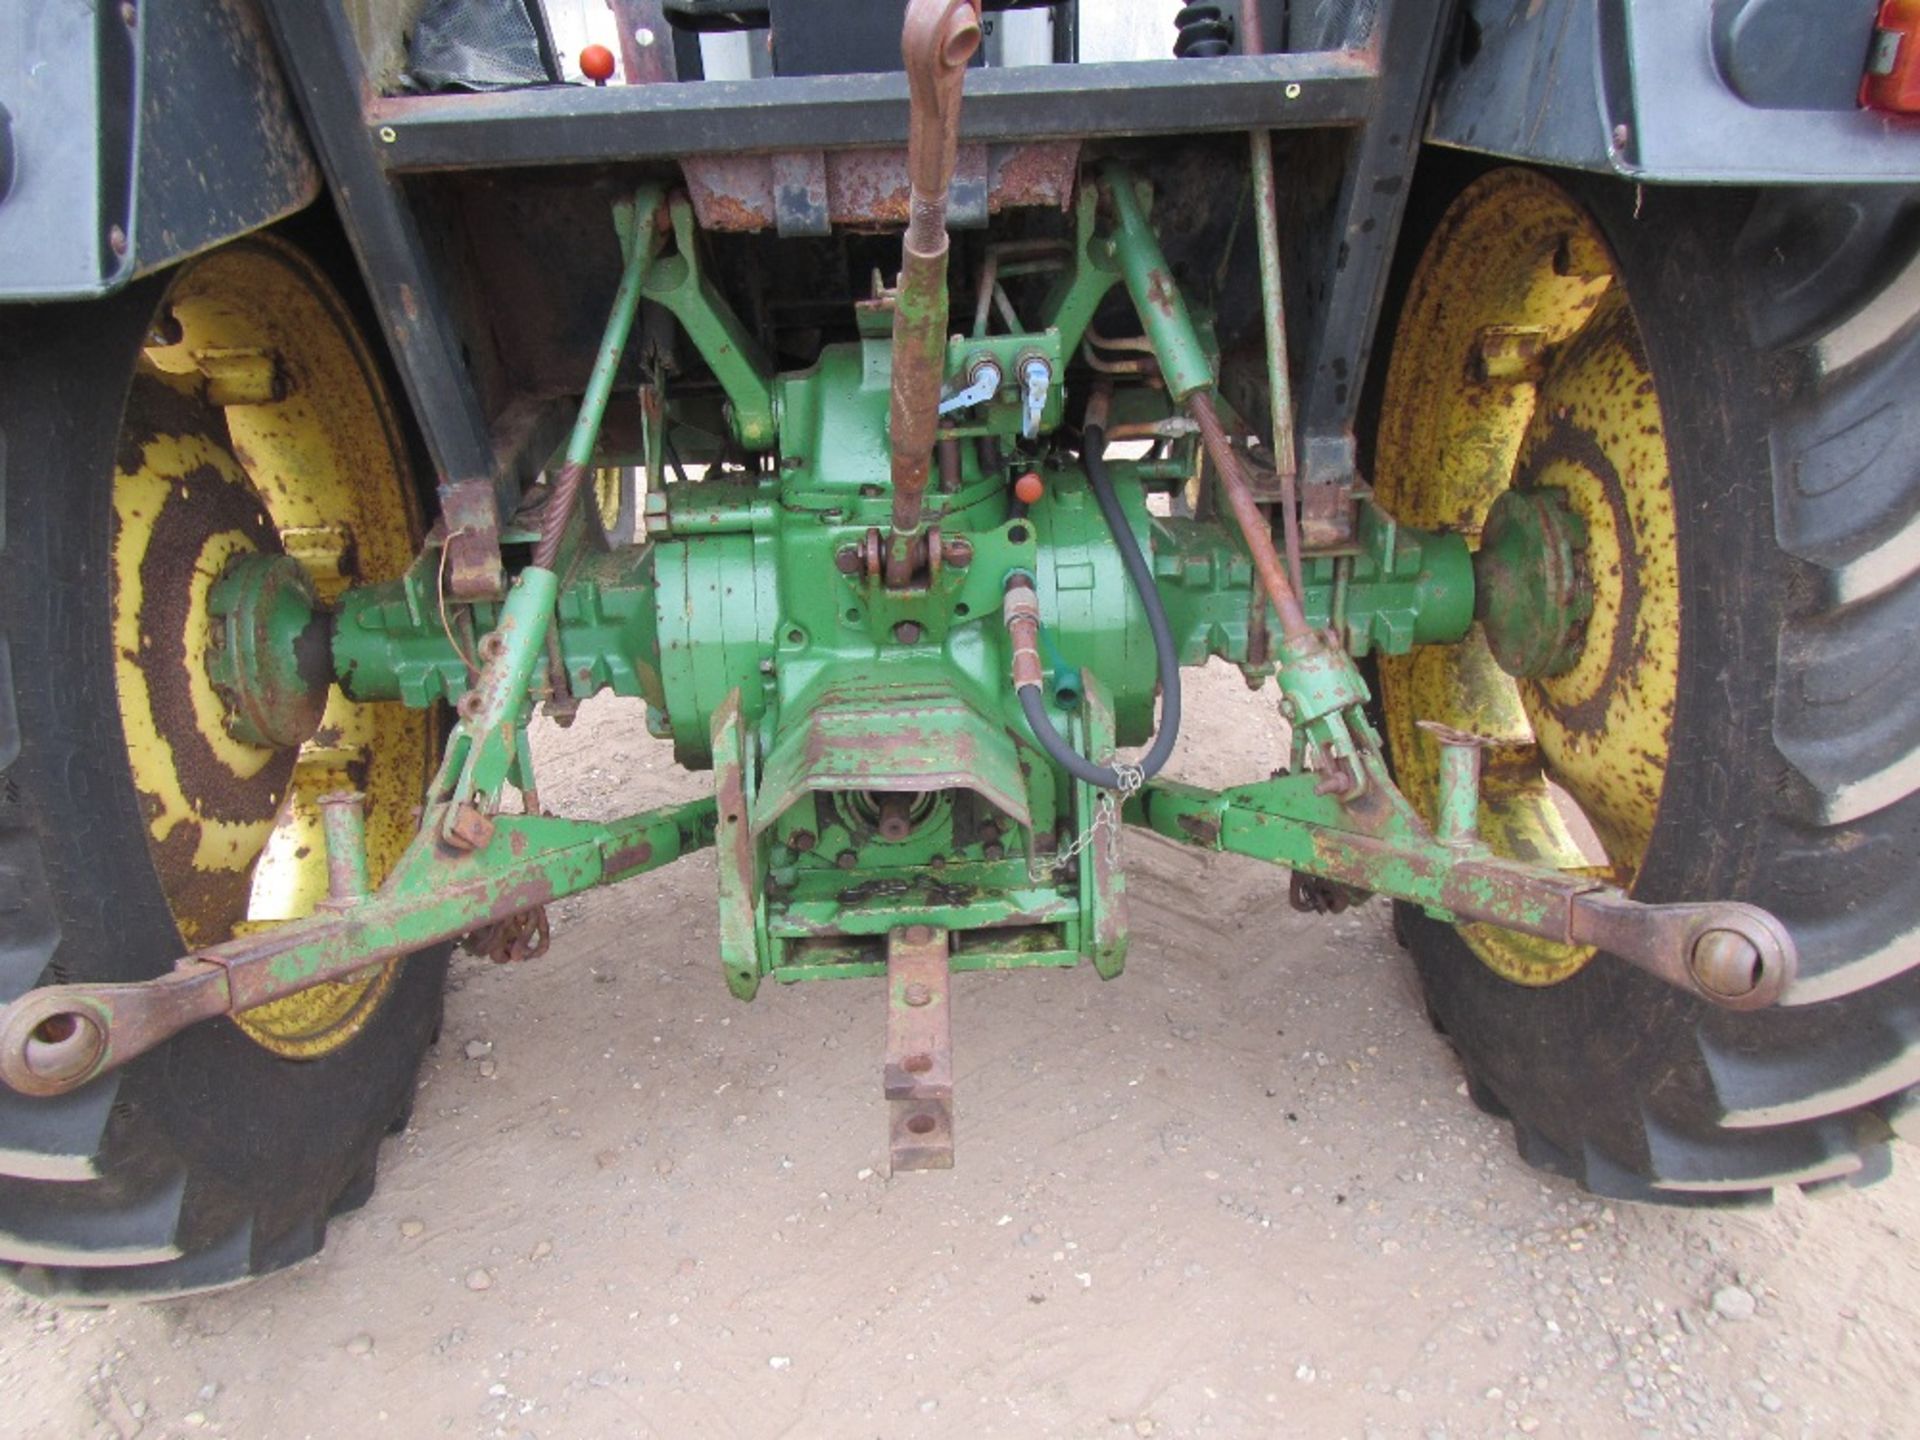 John Deere 3040 4wd Tractor. Subject to TOTAL LOSS INSURANCE CLAIM Reg. No. A122 VFE - Image 7 of 12